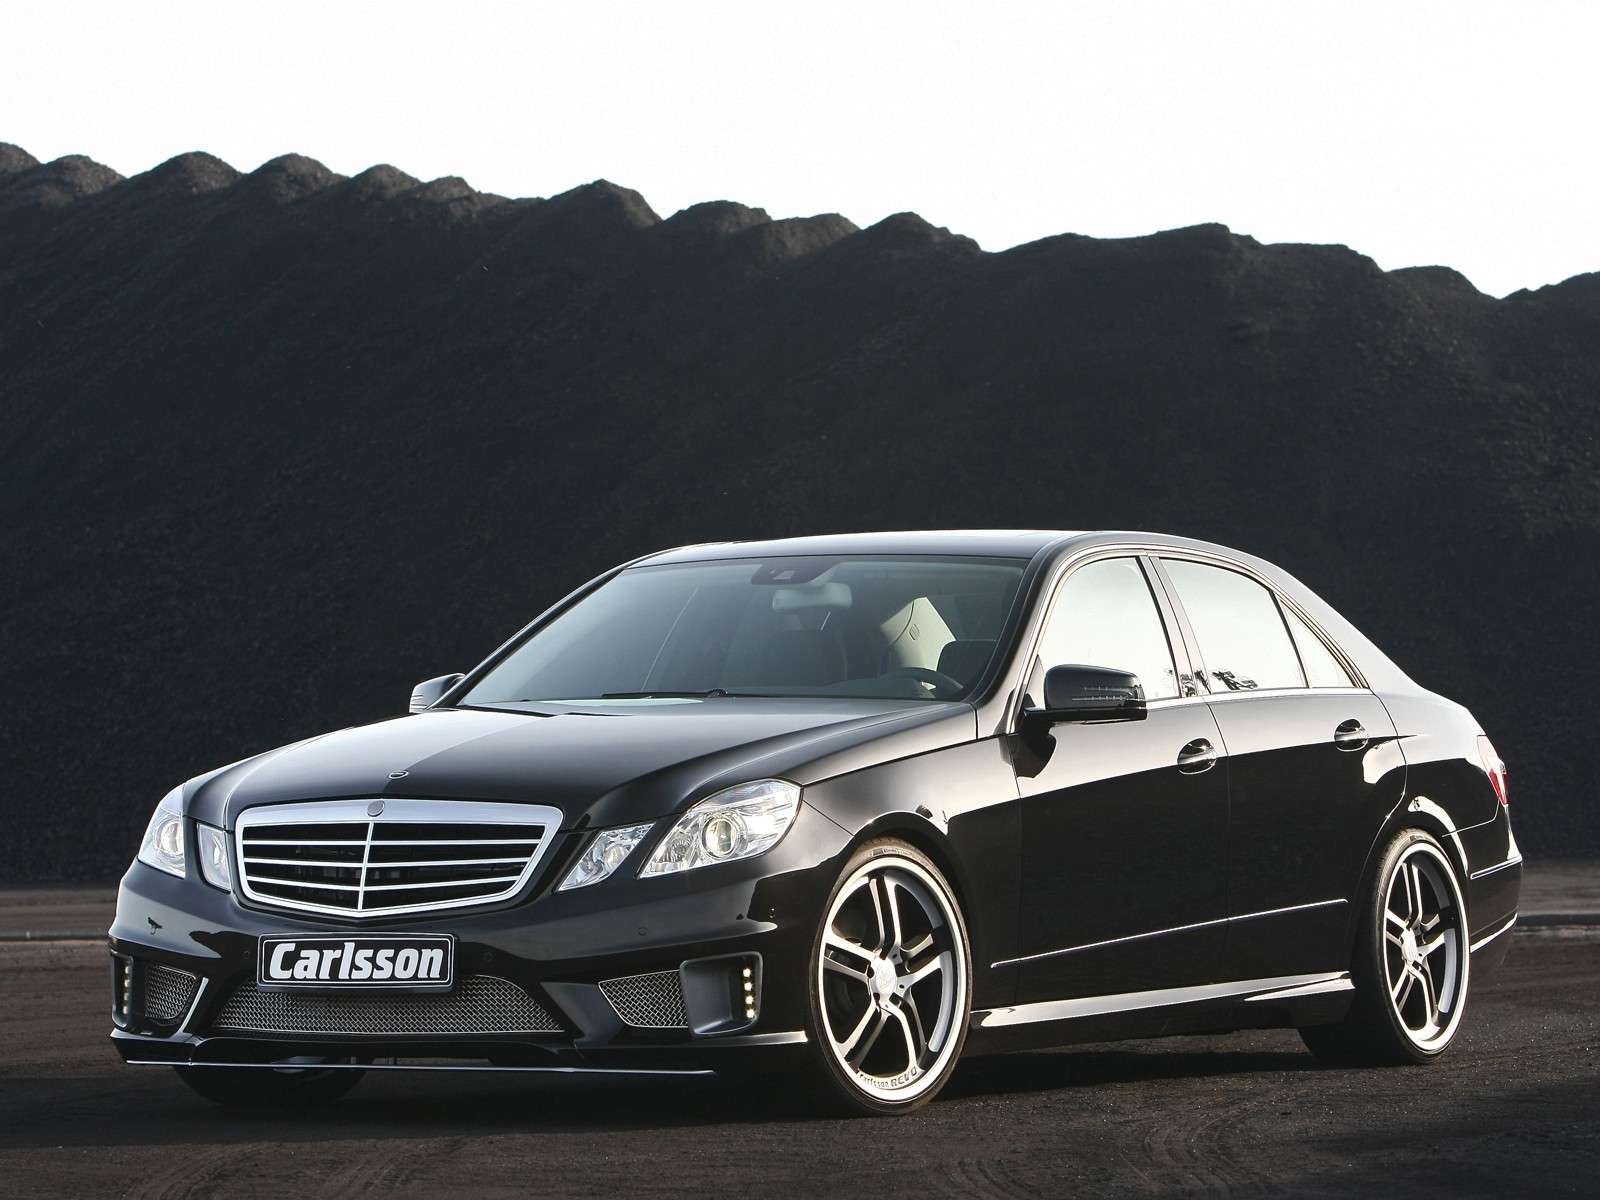 mercedes-benz 2010: E350 4Matic for those only who drive aggressively #4